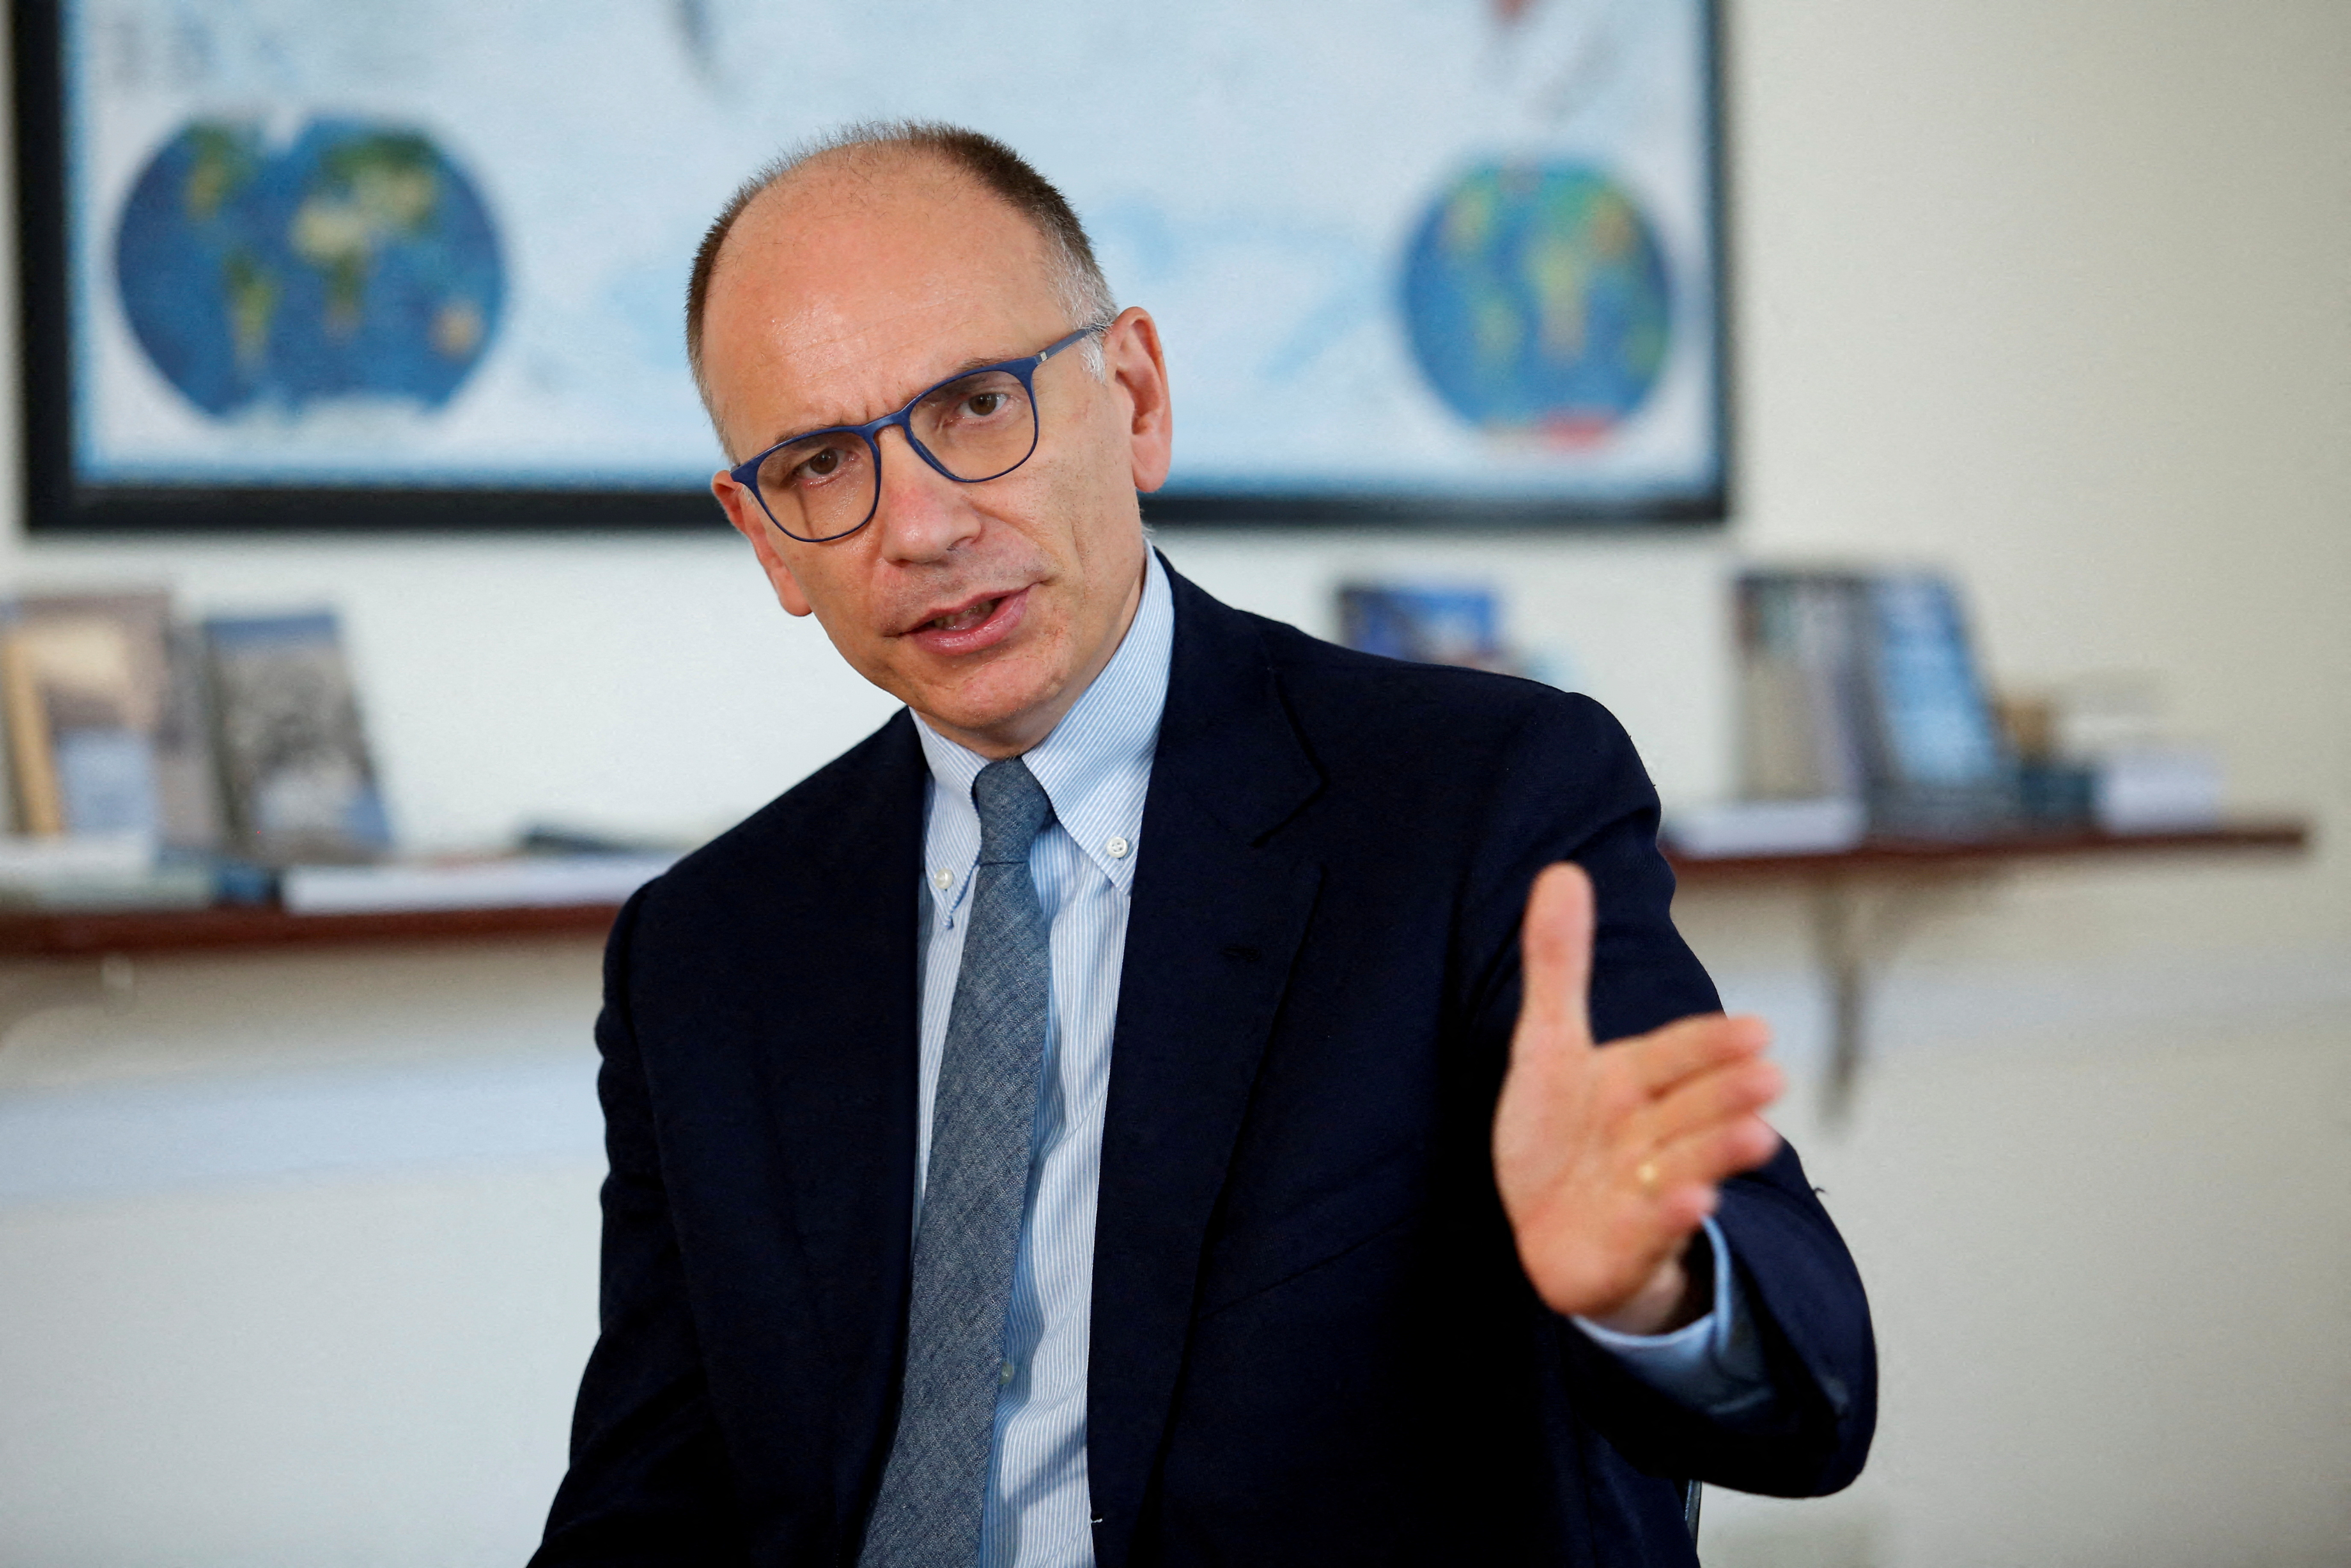 Reuters exclusive interview with Enrico Letta, the head of the centre-left Democratic Party, in Rome